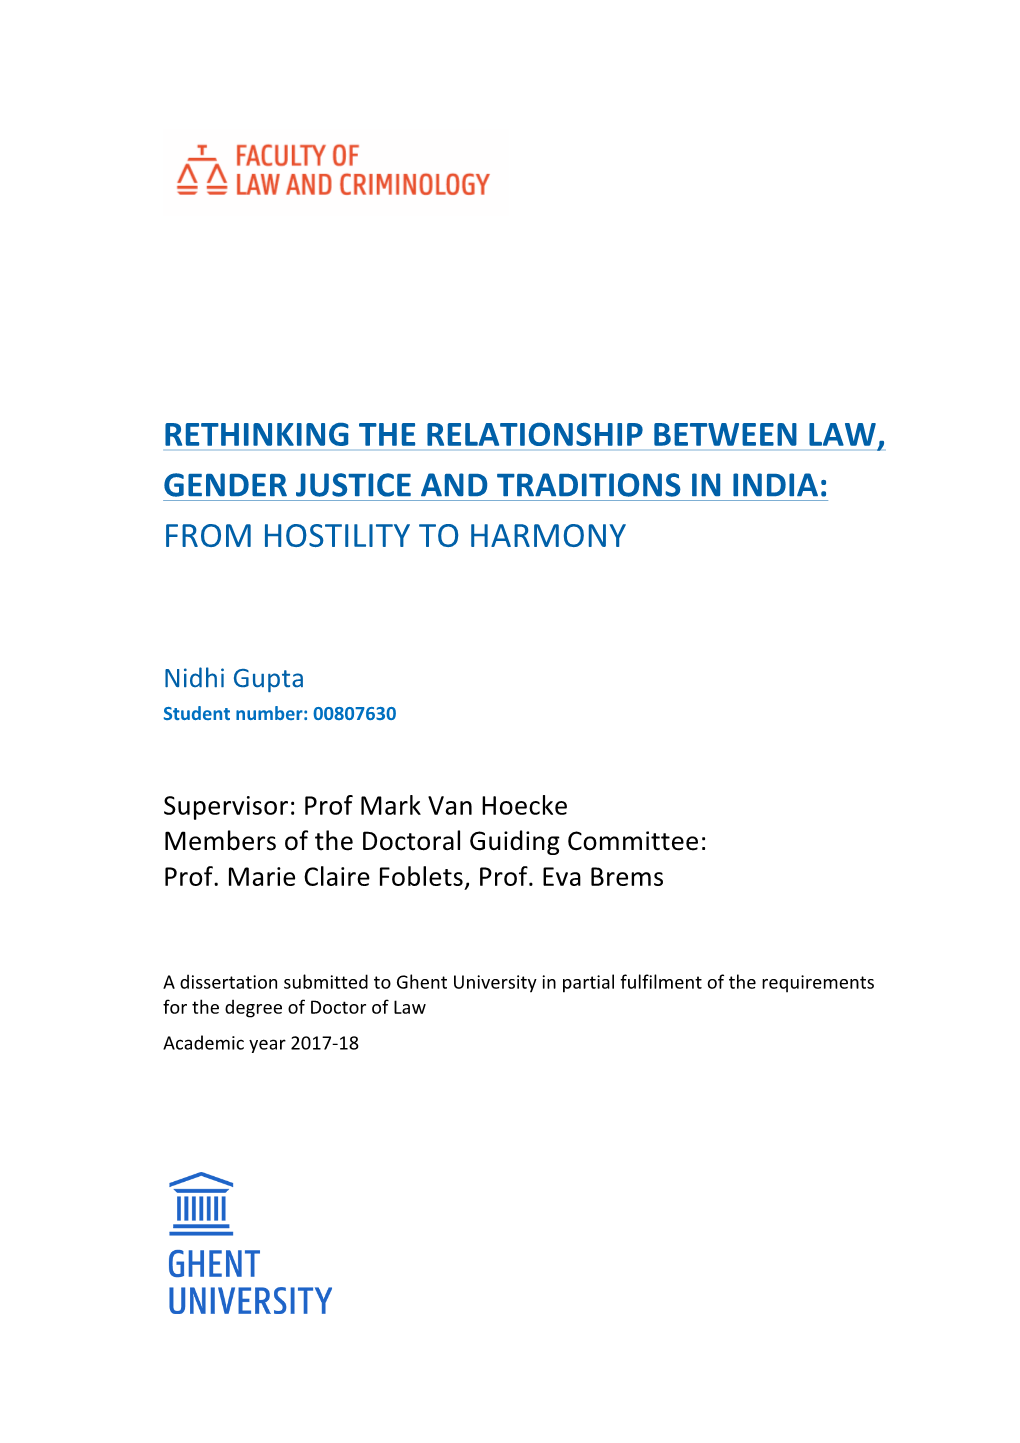 Rethinking the Relationship Between Law, Gender Justice and Traditions in India: from Hostility to Harmony